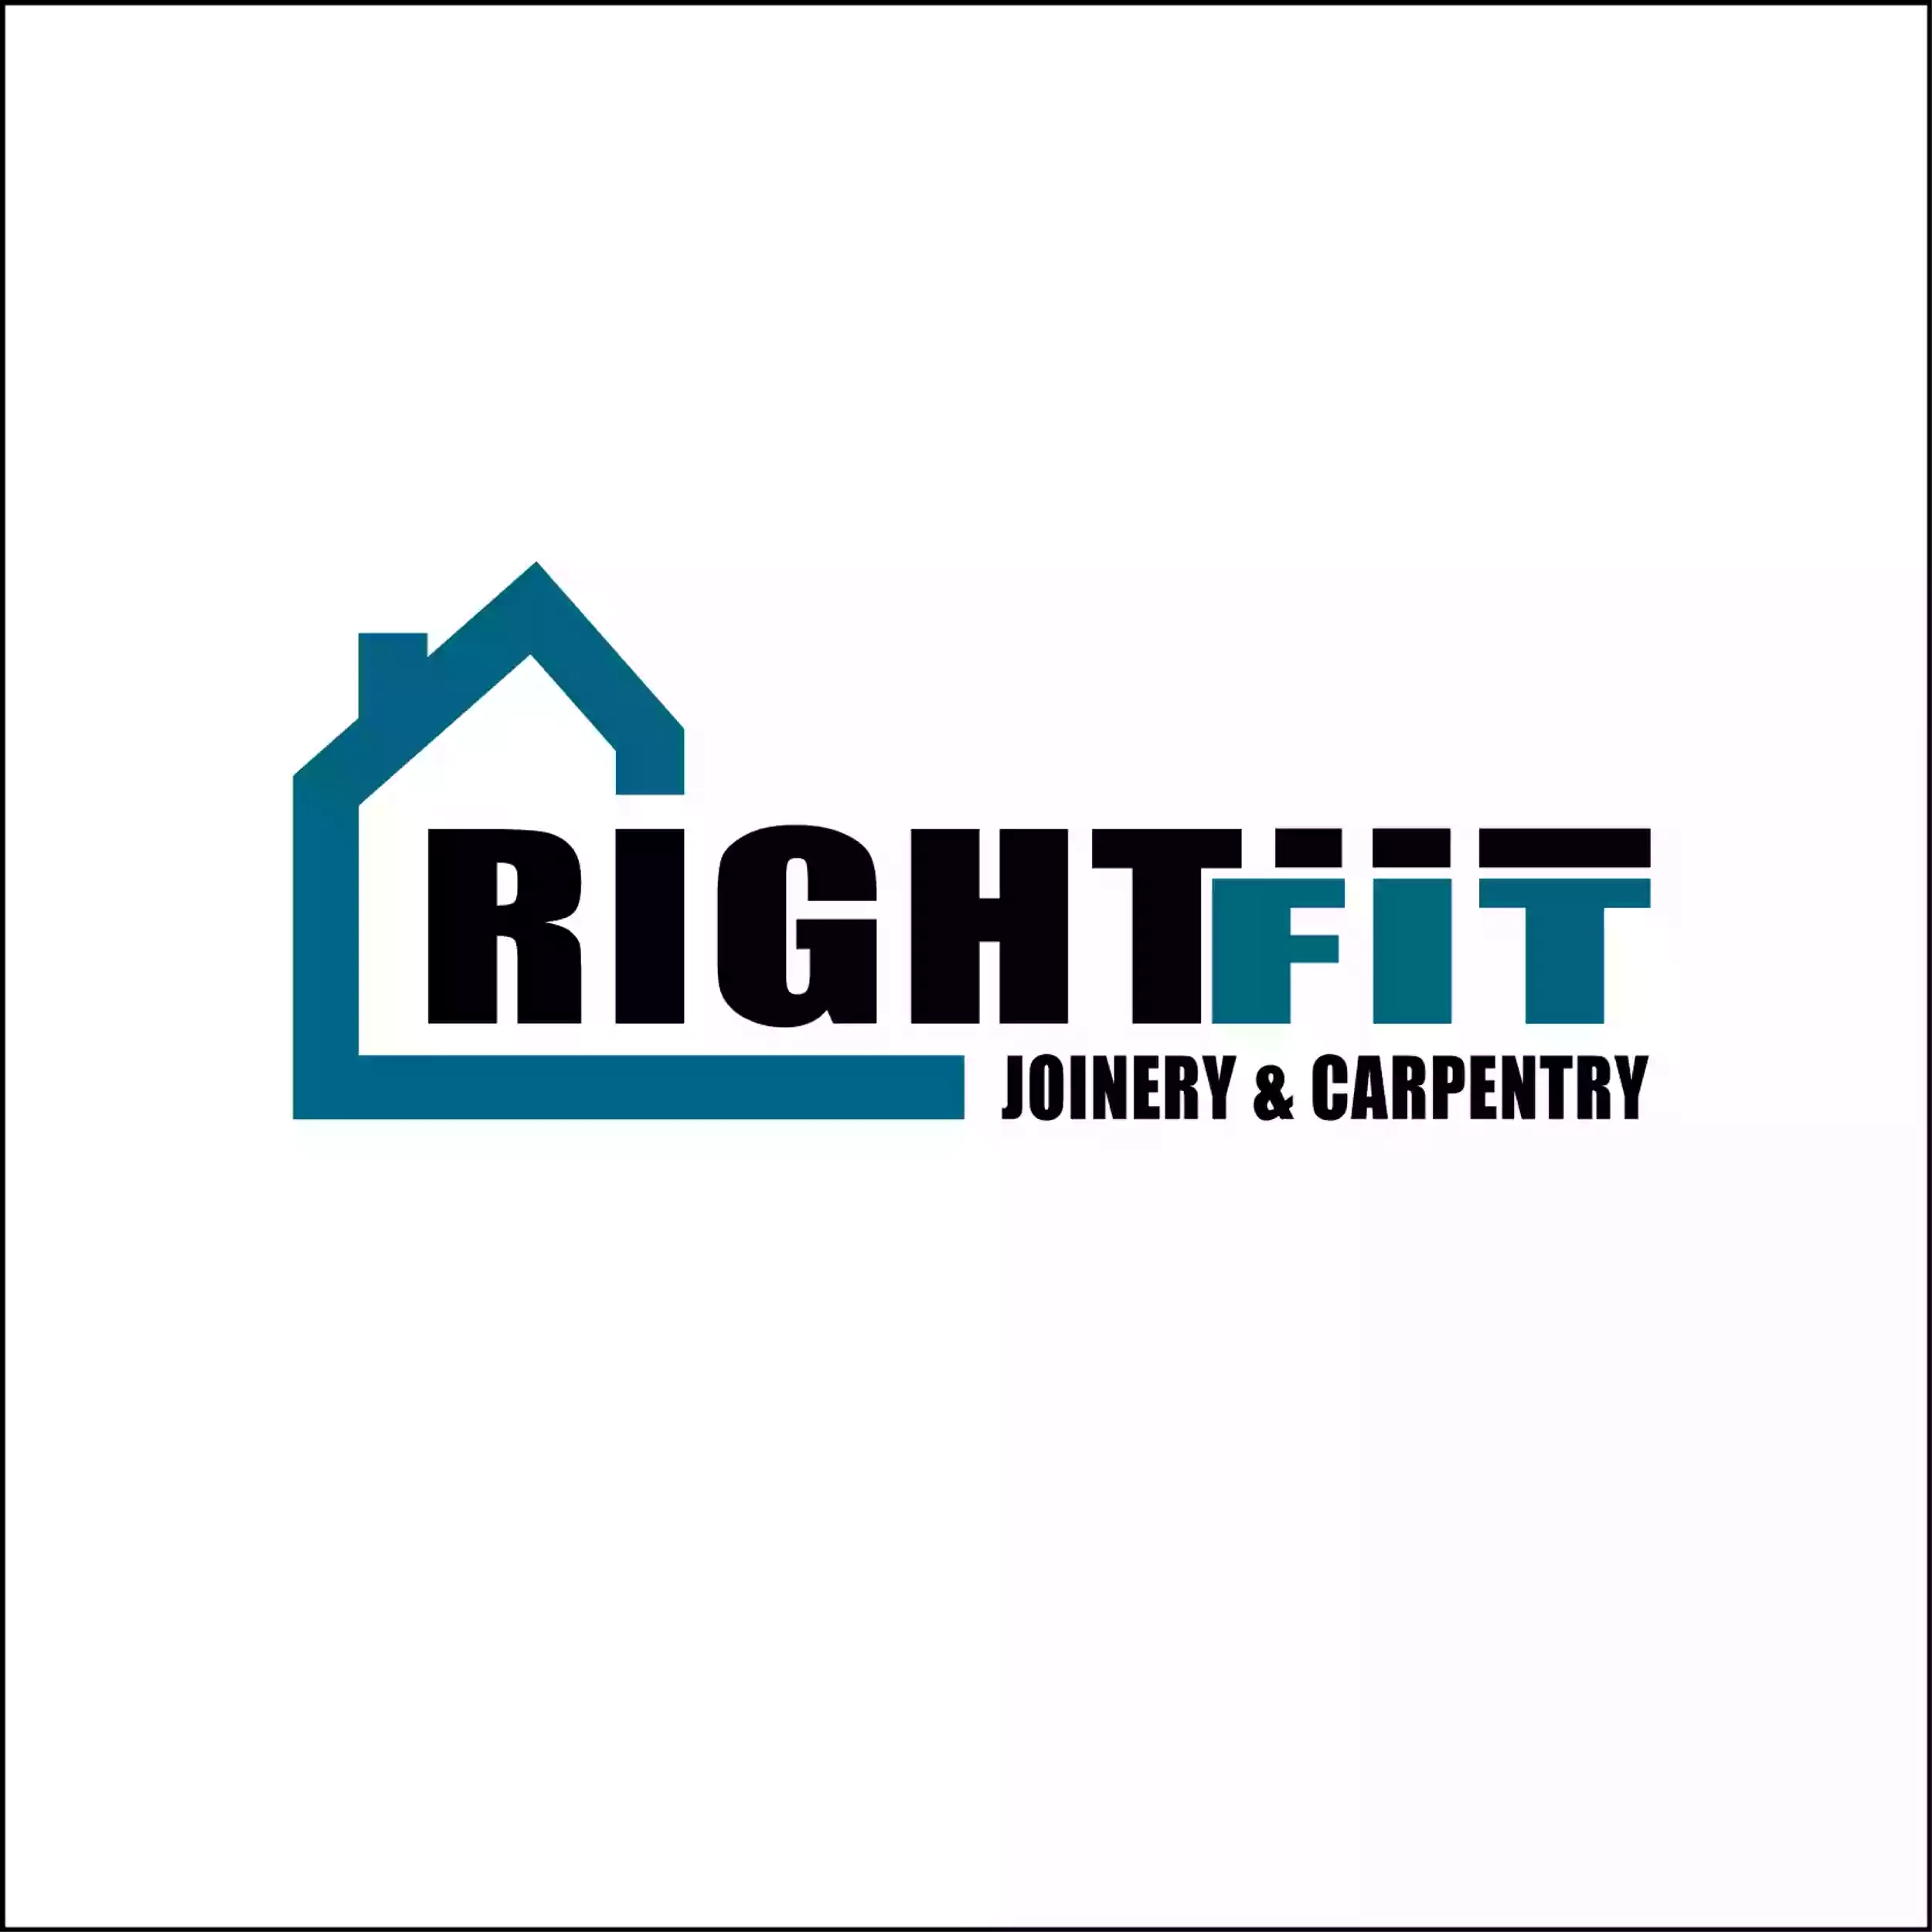 Right Fit Joinery & Carpentry